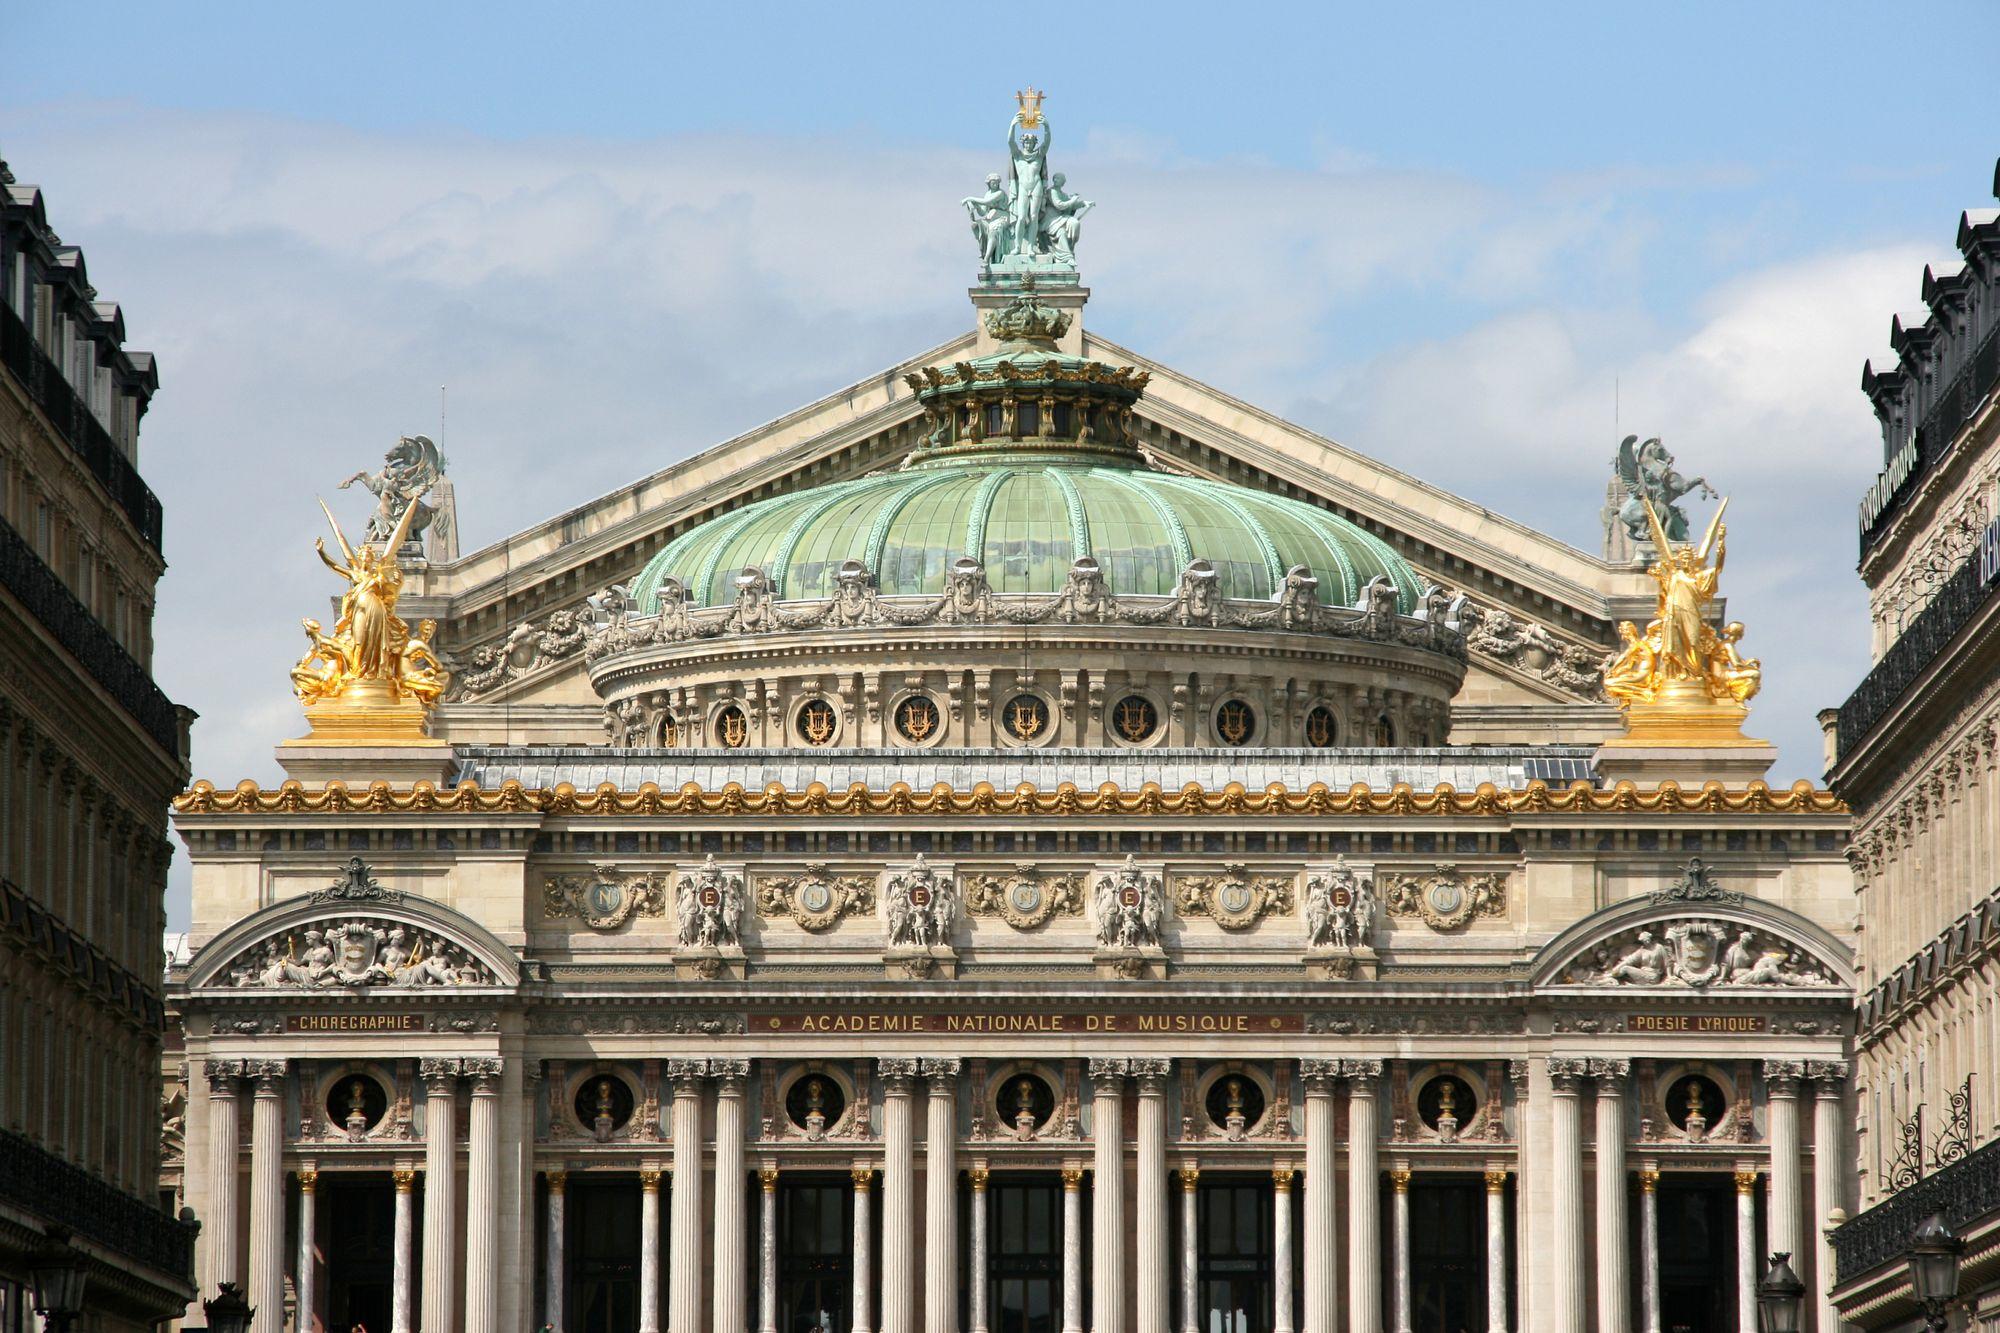 Close to Hotel Gramont Paris, the Opera Garnier, inaugurated in 1875, stands as an emblem of the district.